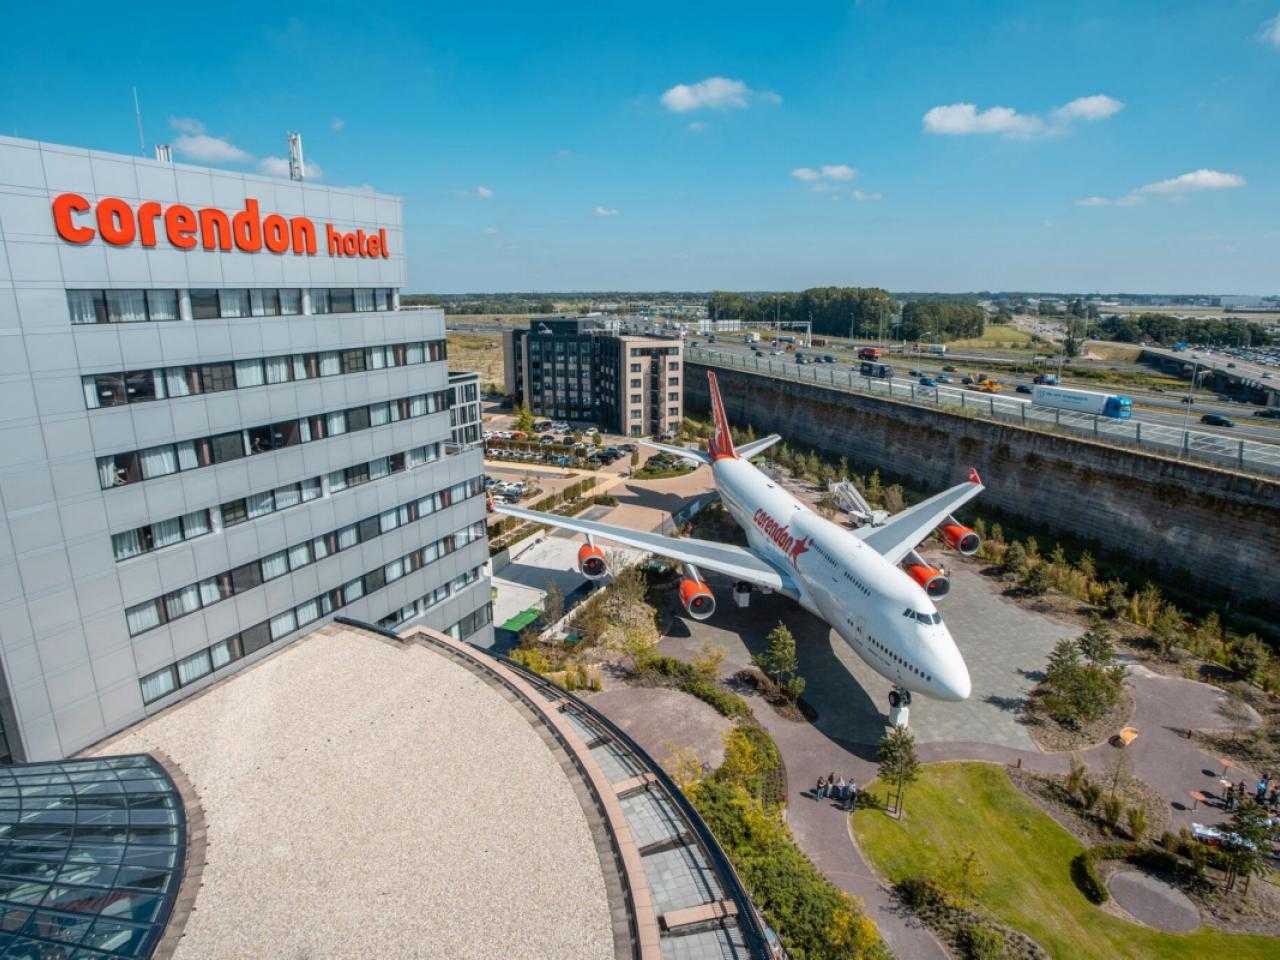 View of hotel Corendon with airplane next to it